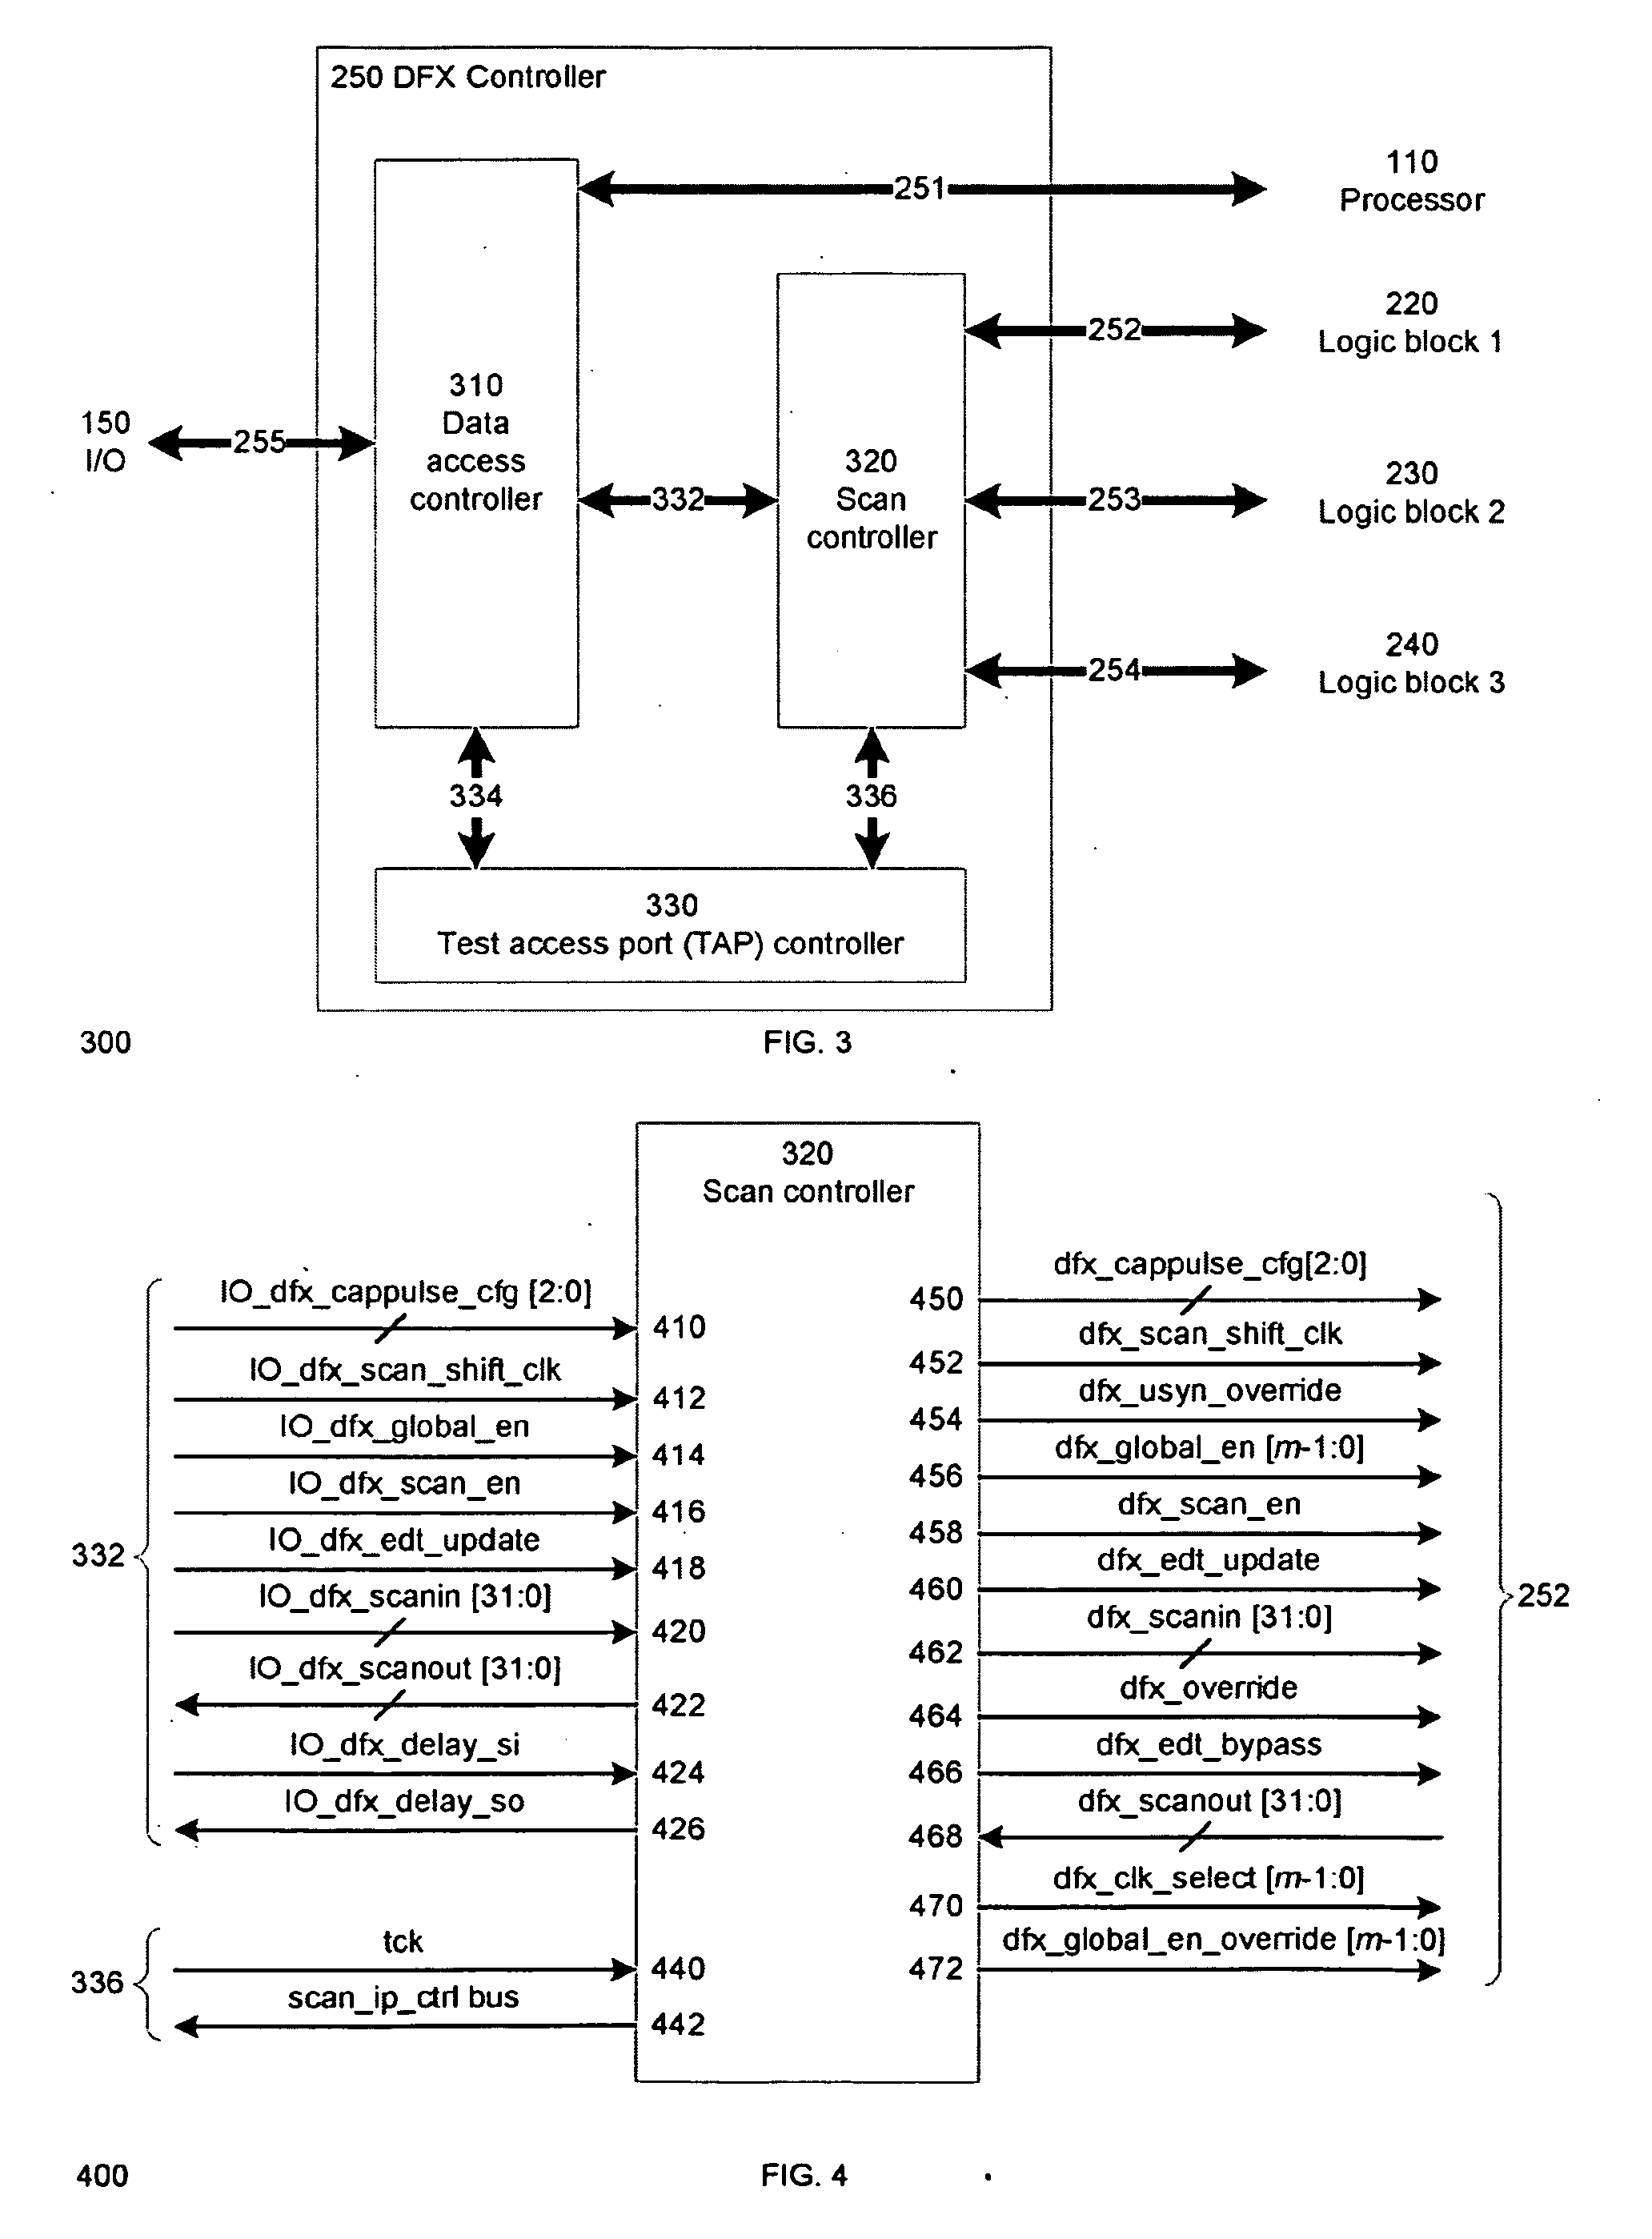 Scalable scan system for system-on-chip design